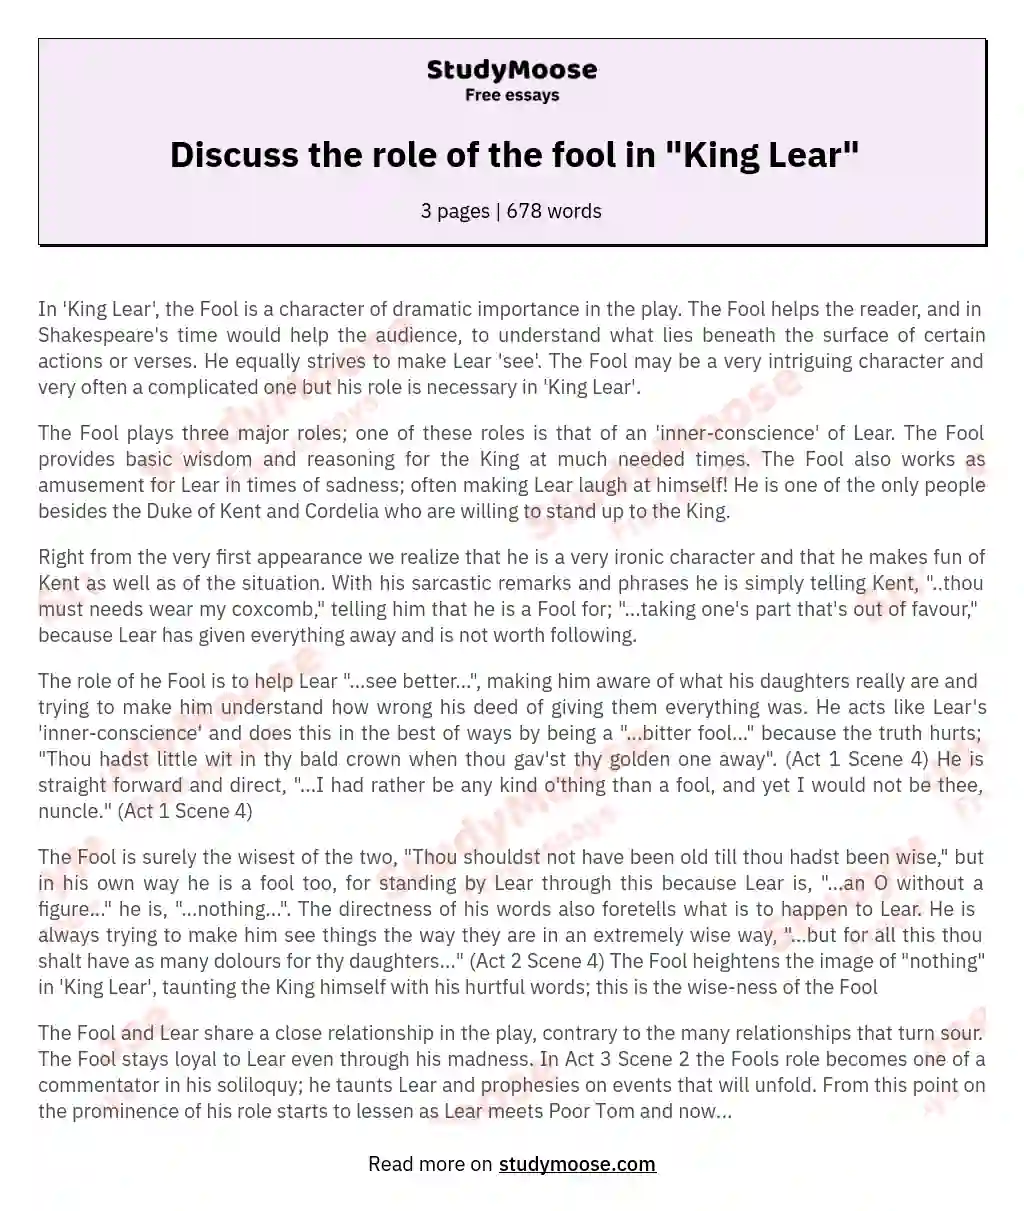 Discuss the role of the fool in "King Lear" essay